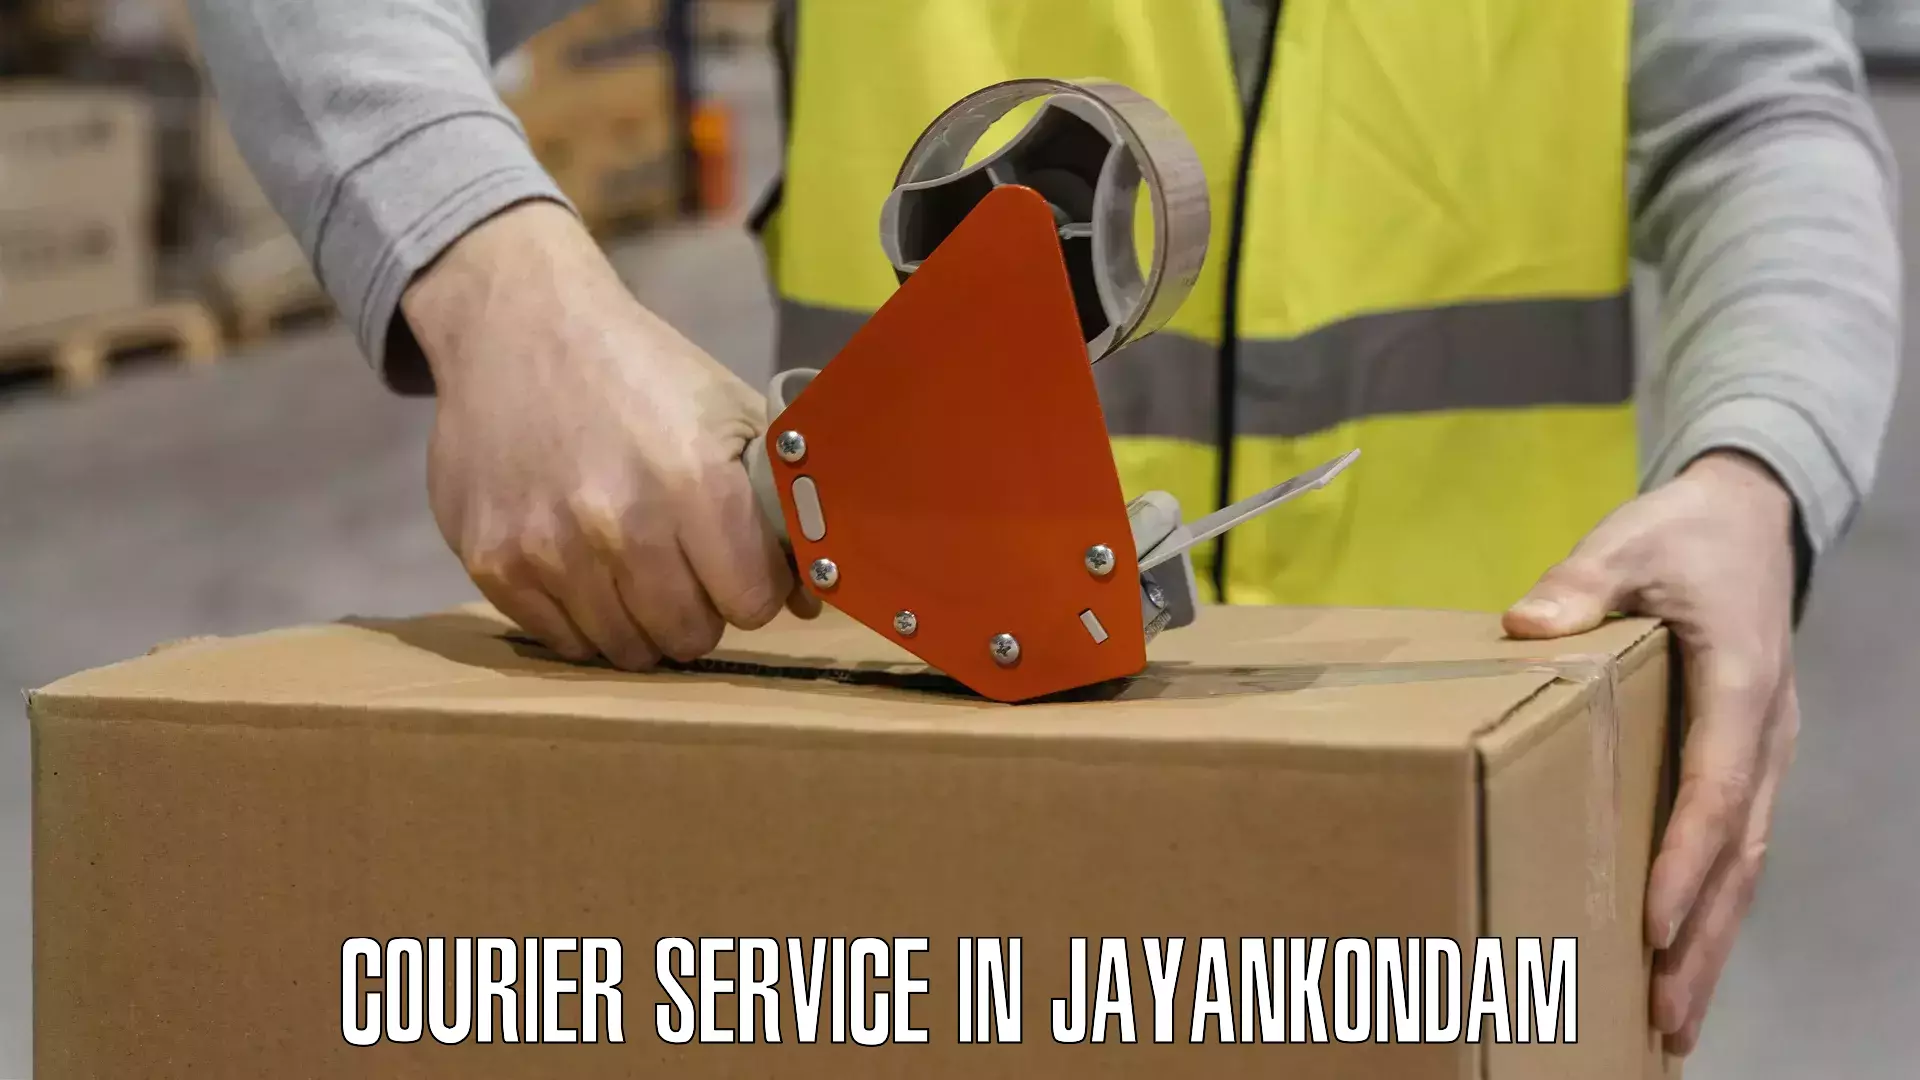 Reliable shipping partners in Jayankondam